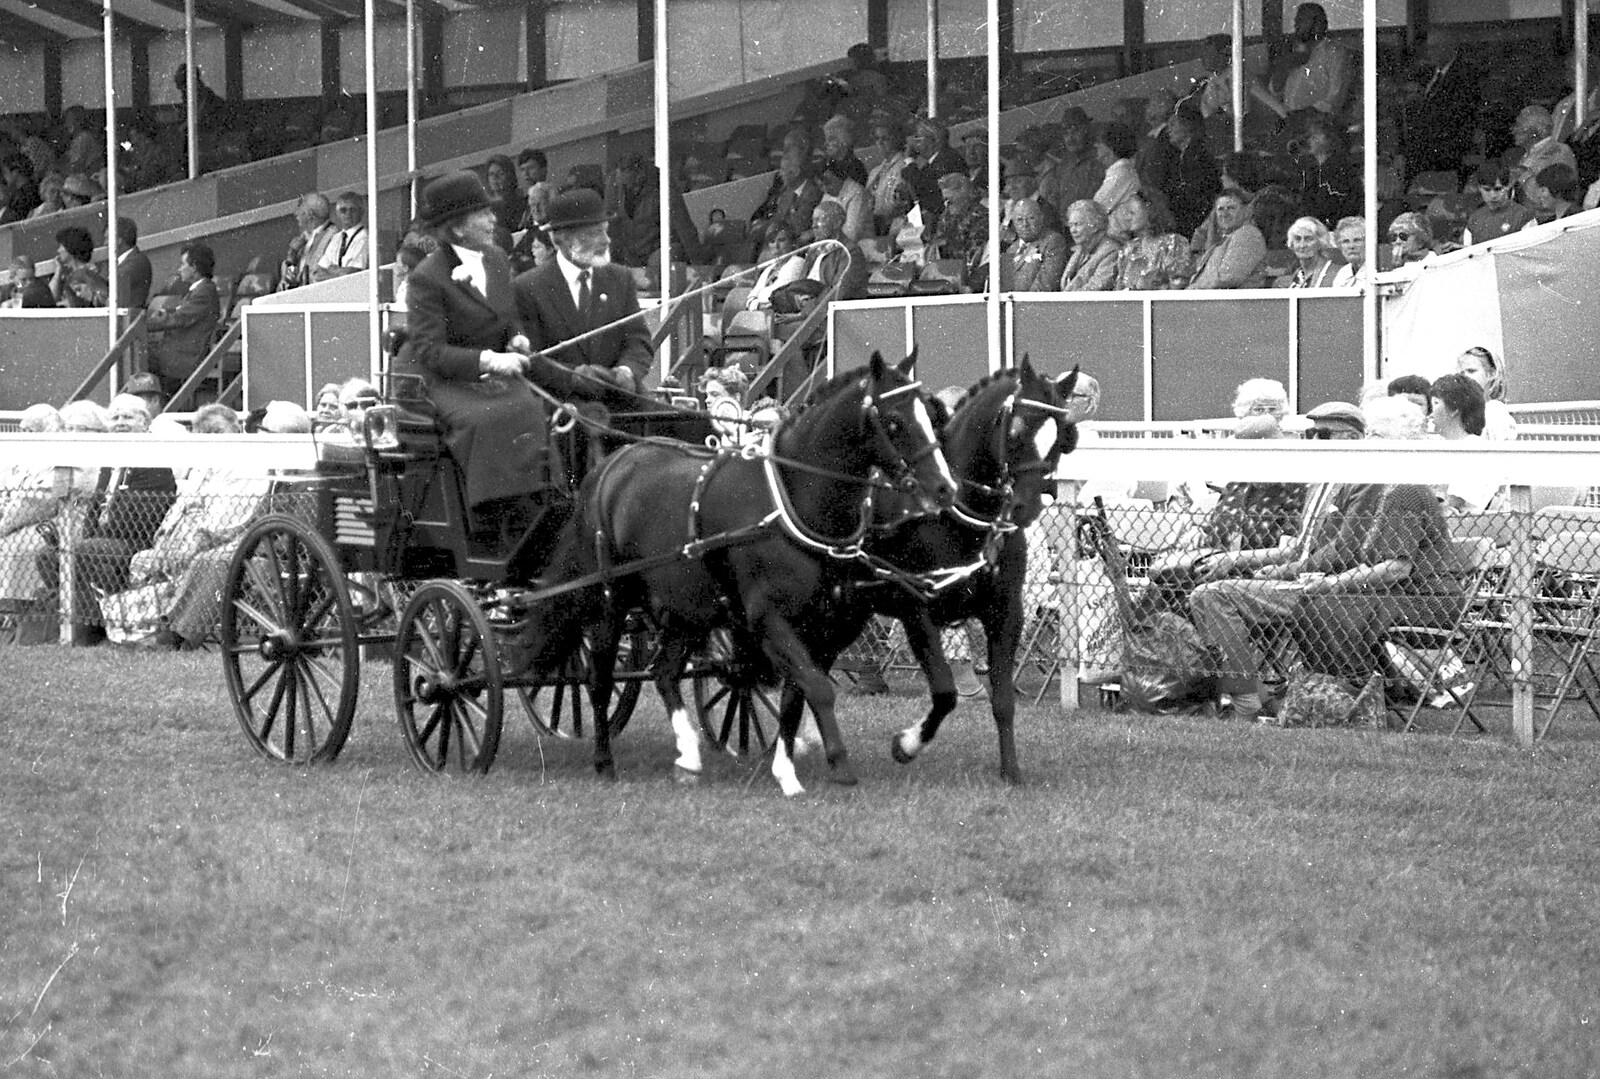 The Royal Norfolk Show, Costessey, Norwich - June 20th 1994: A pair of horses haul a carriage around